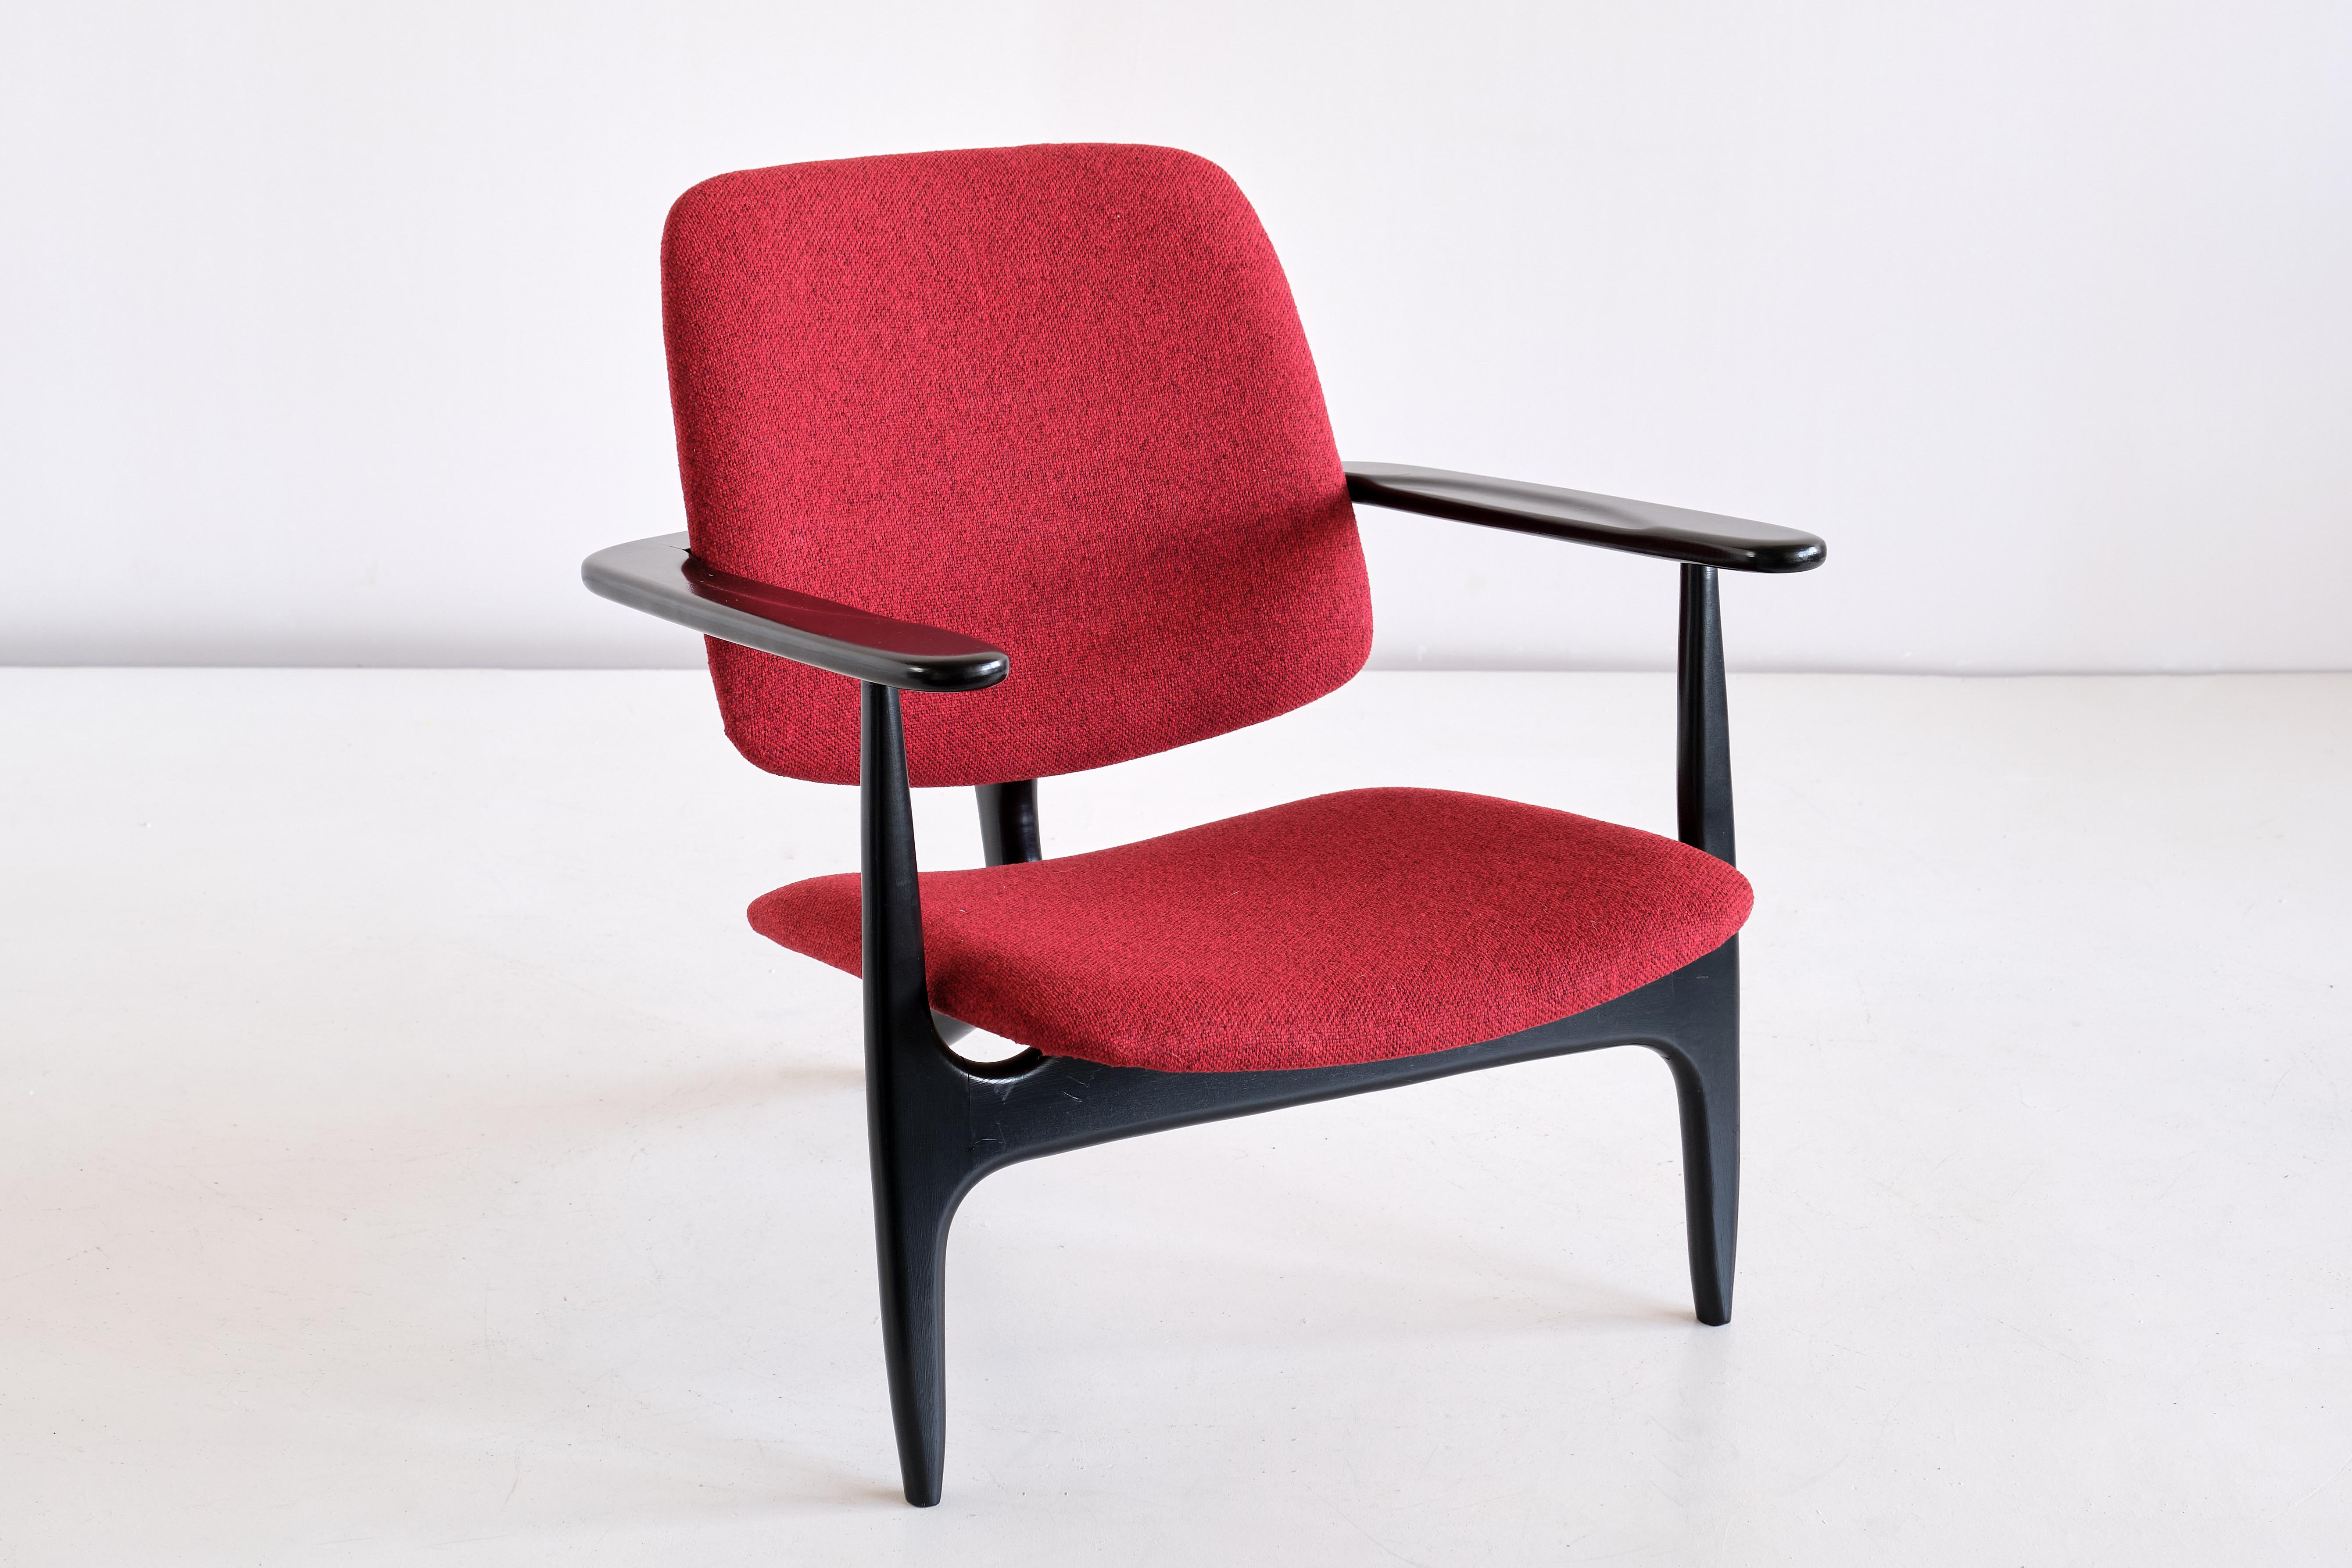 Mid-Century Modern Alfred Hendrickx S3 Armchair Designed for Sabena Airlines, Belgium, 1958 For Sale